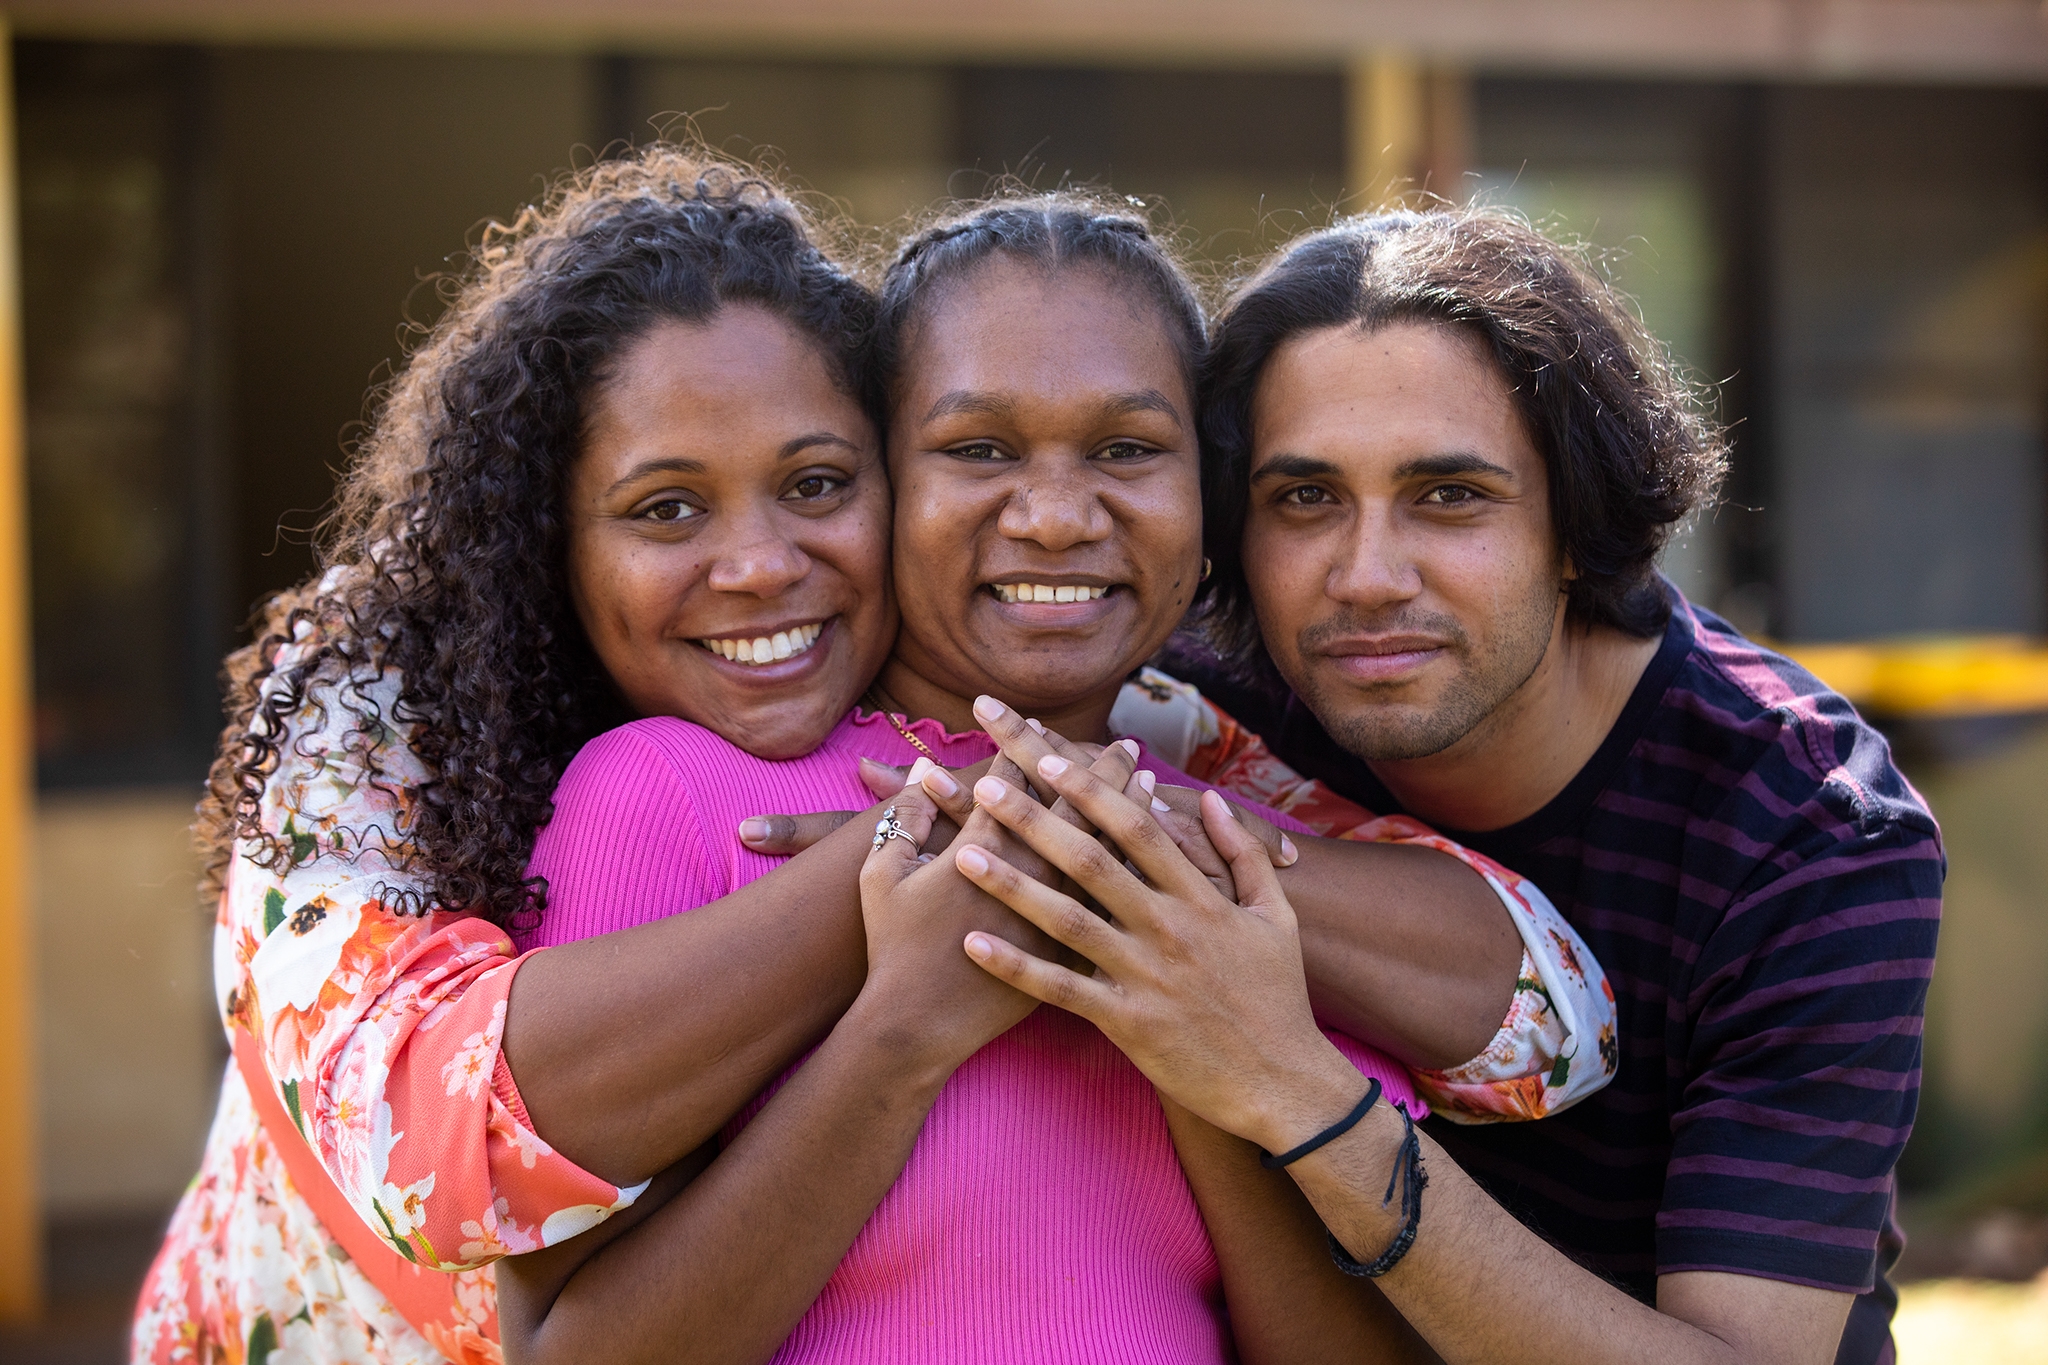 Three young aboriginal students outdoors with their arms around each other smiling at the camera.